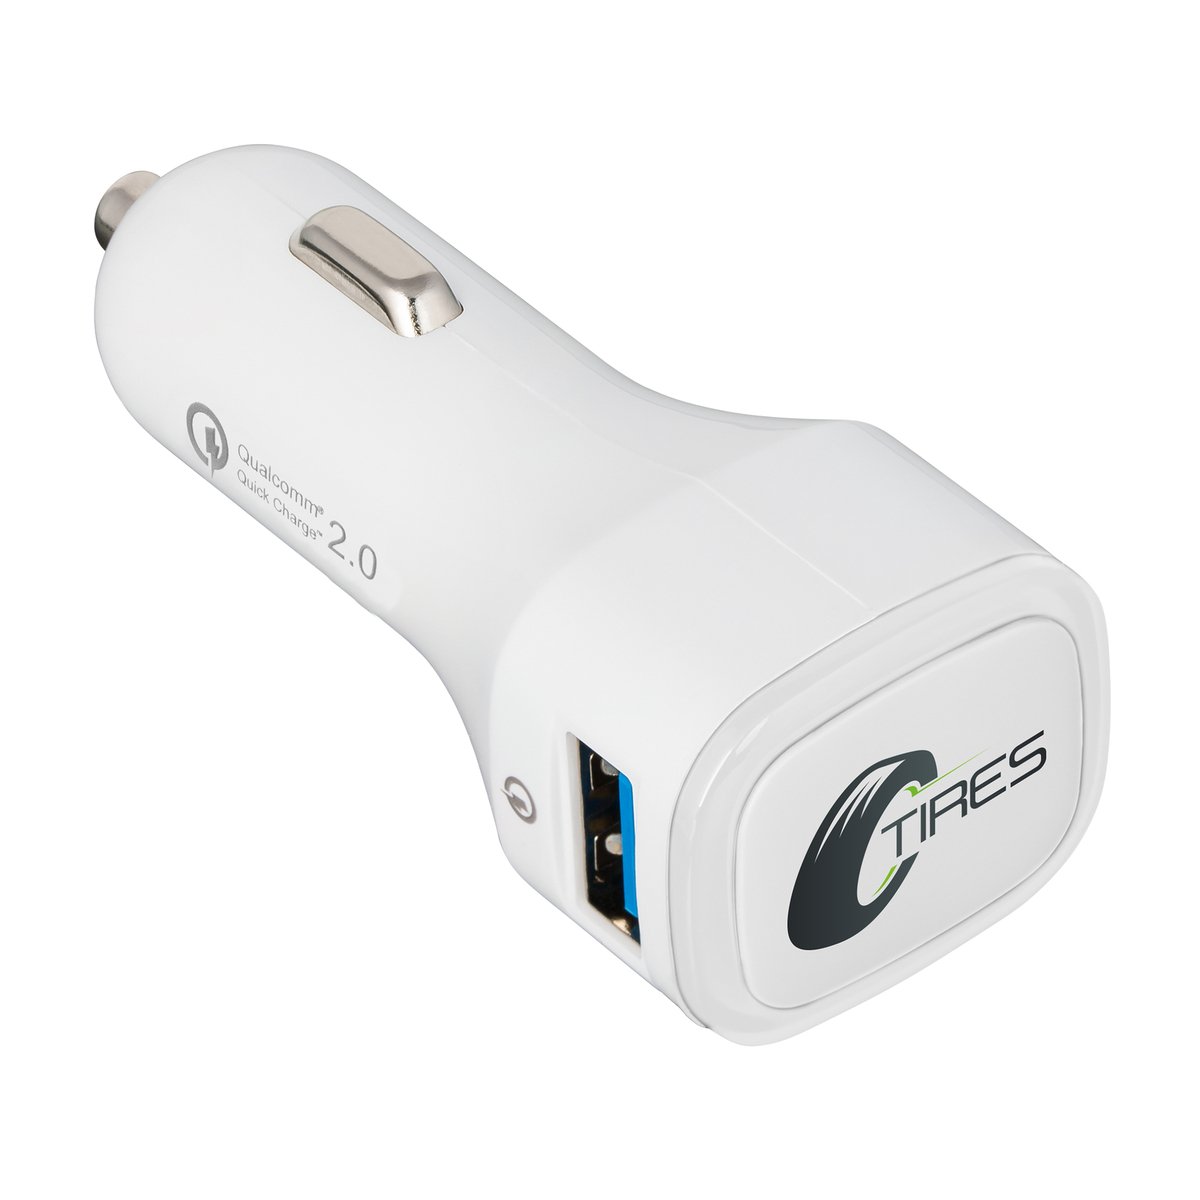 Chargeur voiture USB Quick Charge 2.0® COLLECTION 500 transparent